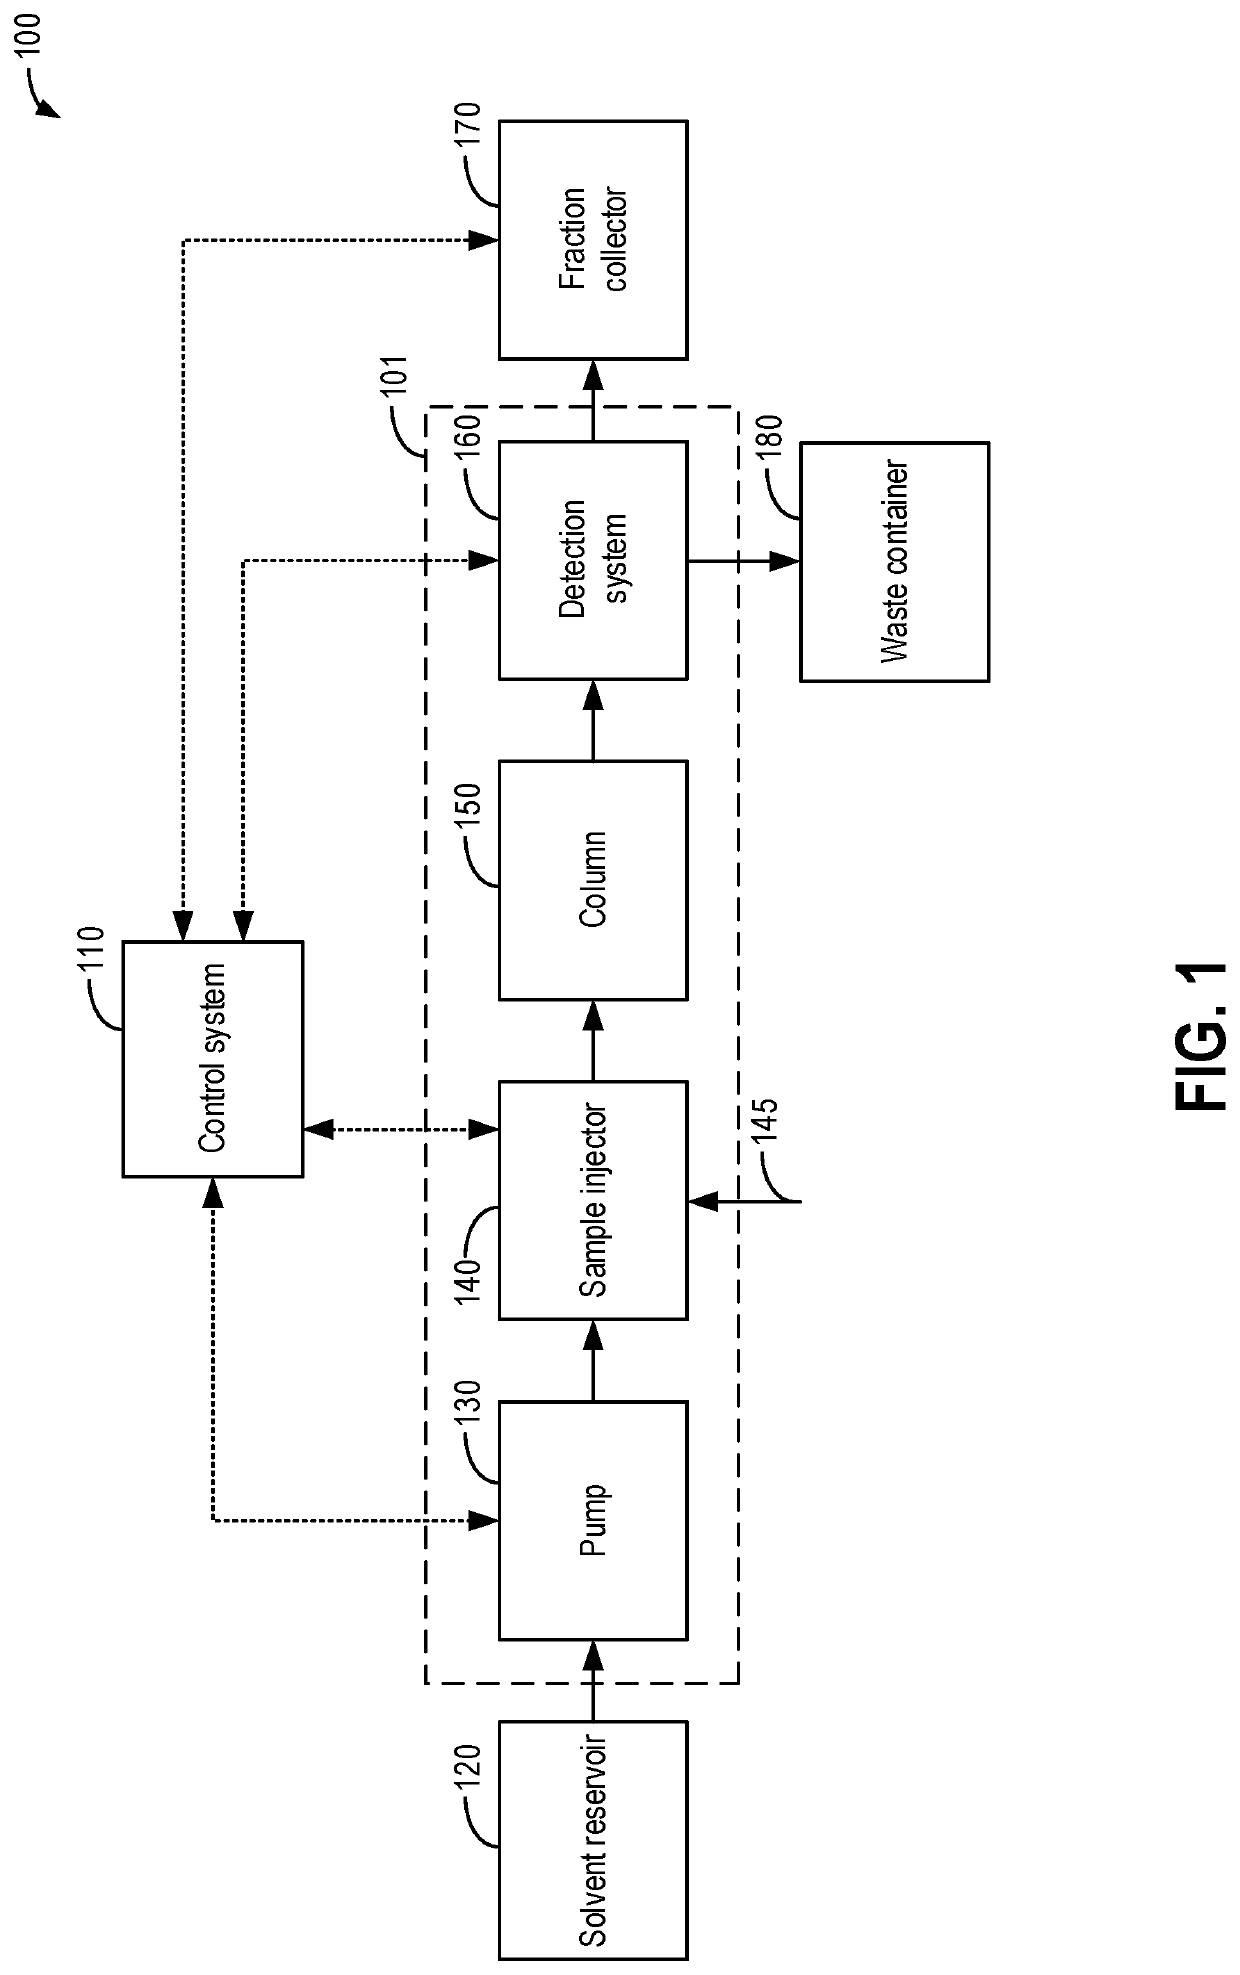 Integrated illumination-detection flow cell for liquid chromatography